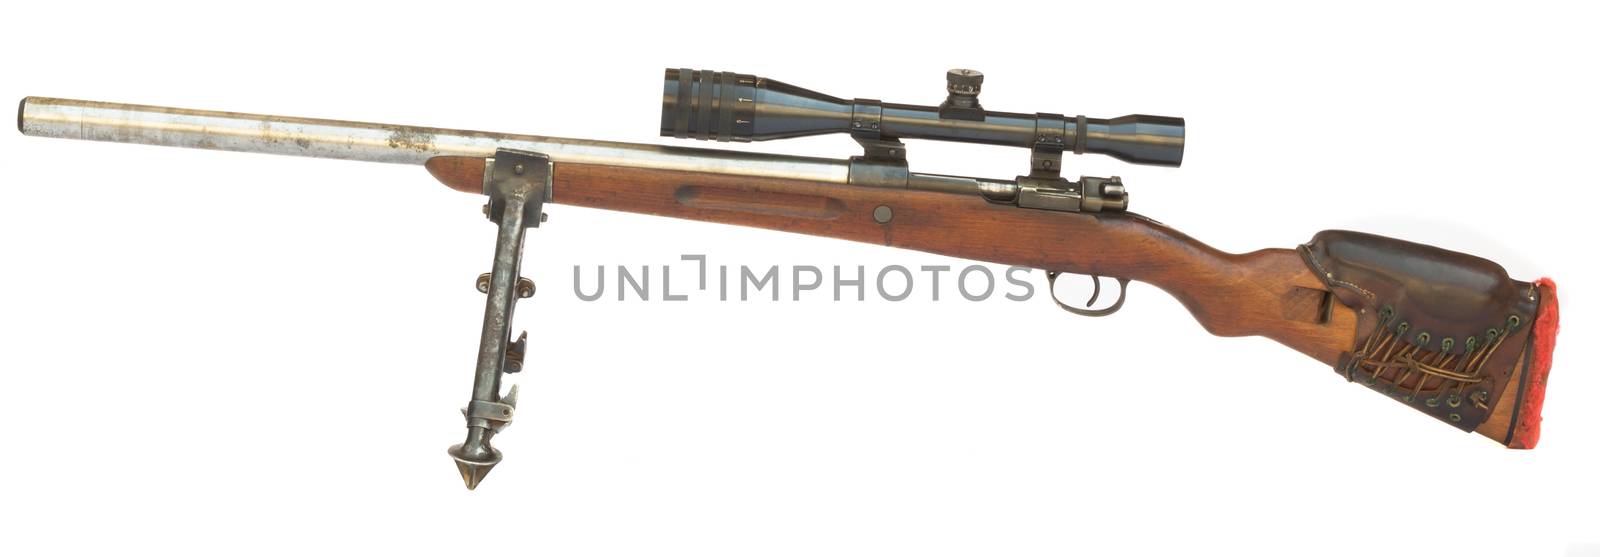 Old Sniper Rifle with scope atached on a tripod isolated on white background